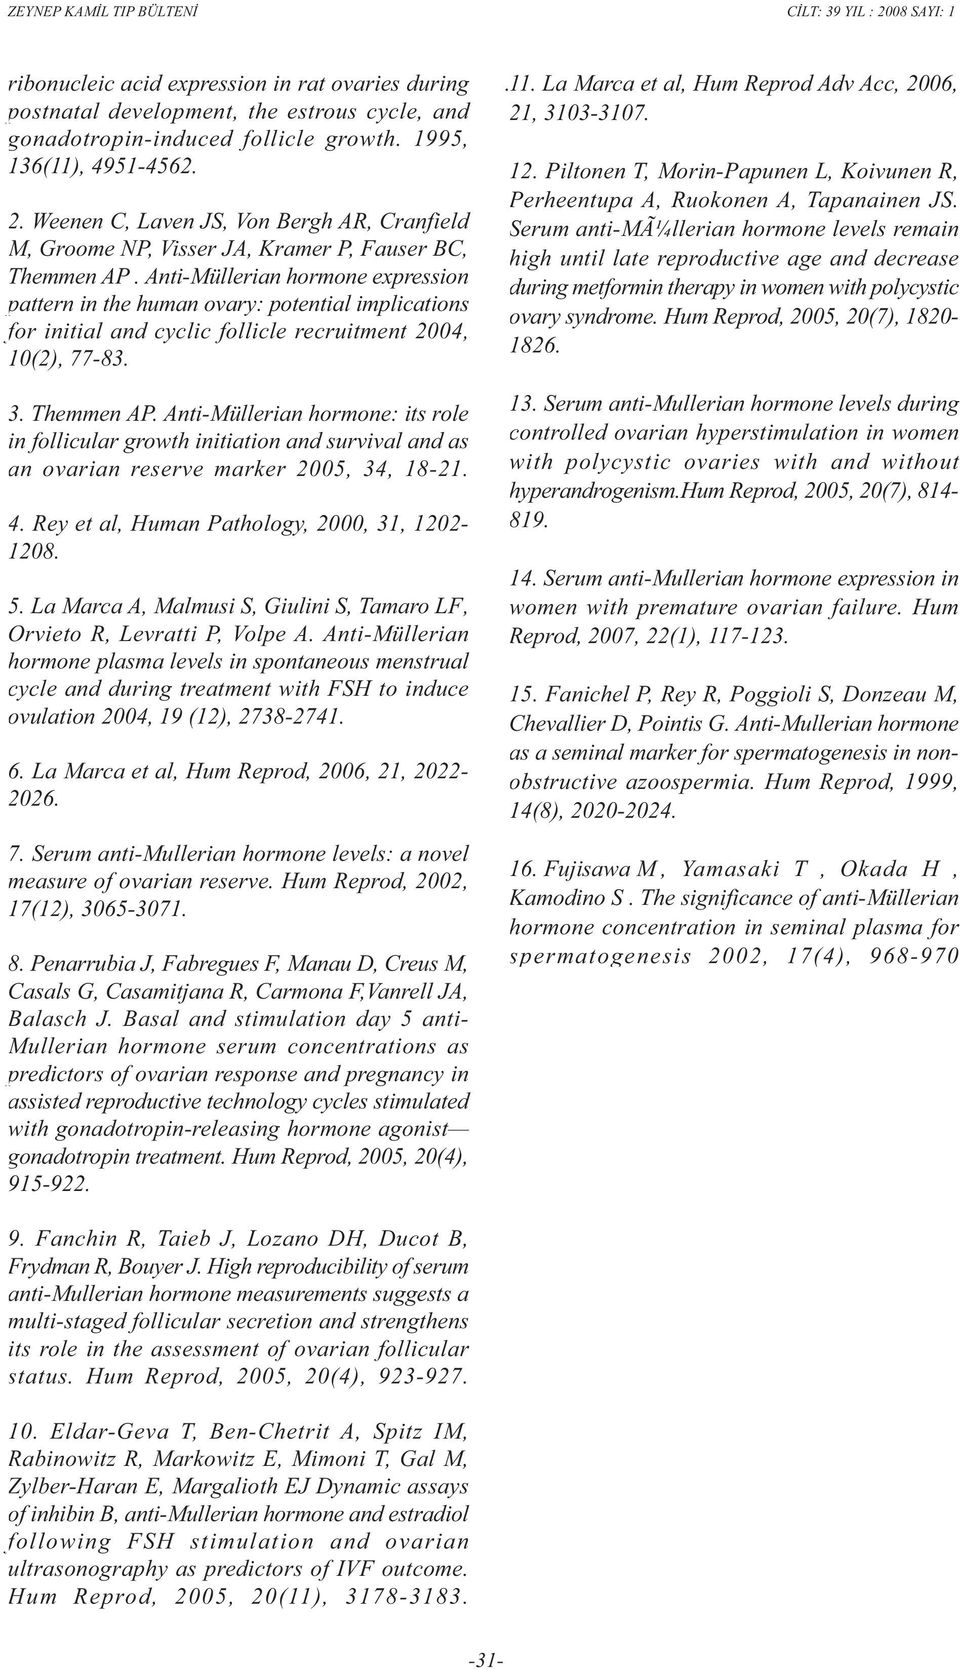 Anti-Müllerian hormone expression pattern in the human ovary: potential implications for initial and cyclic follicle recruitment 2004, 10(2), 77-83. 3. Themmen AP.